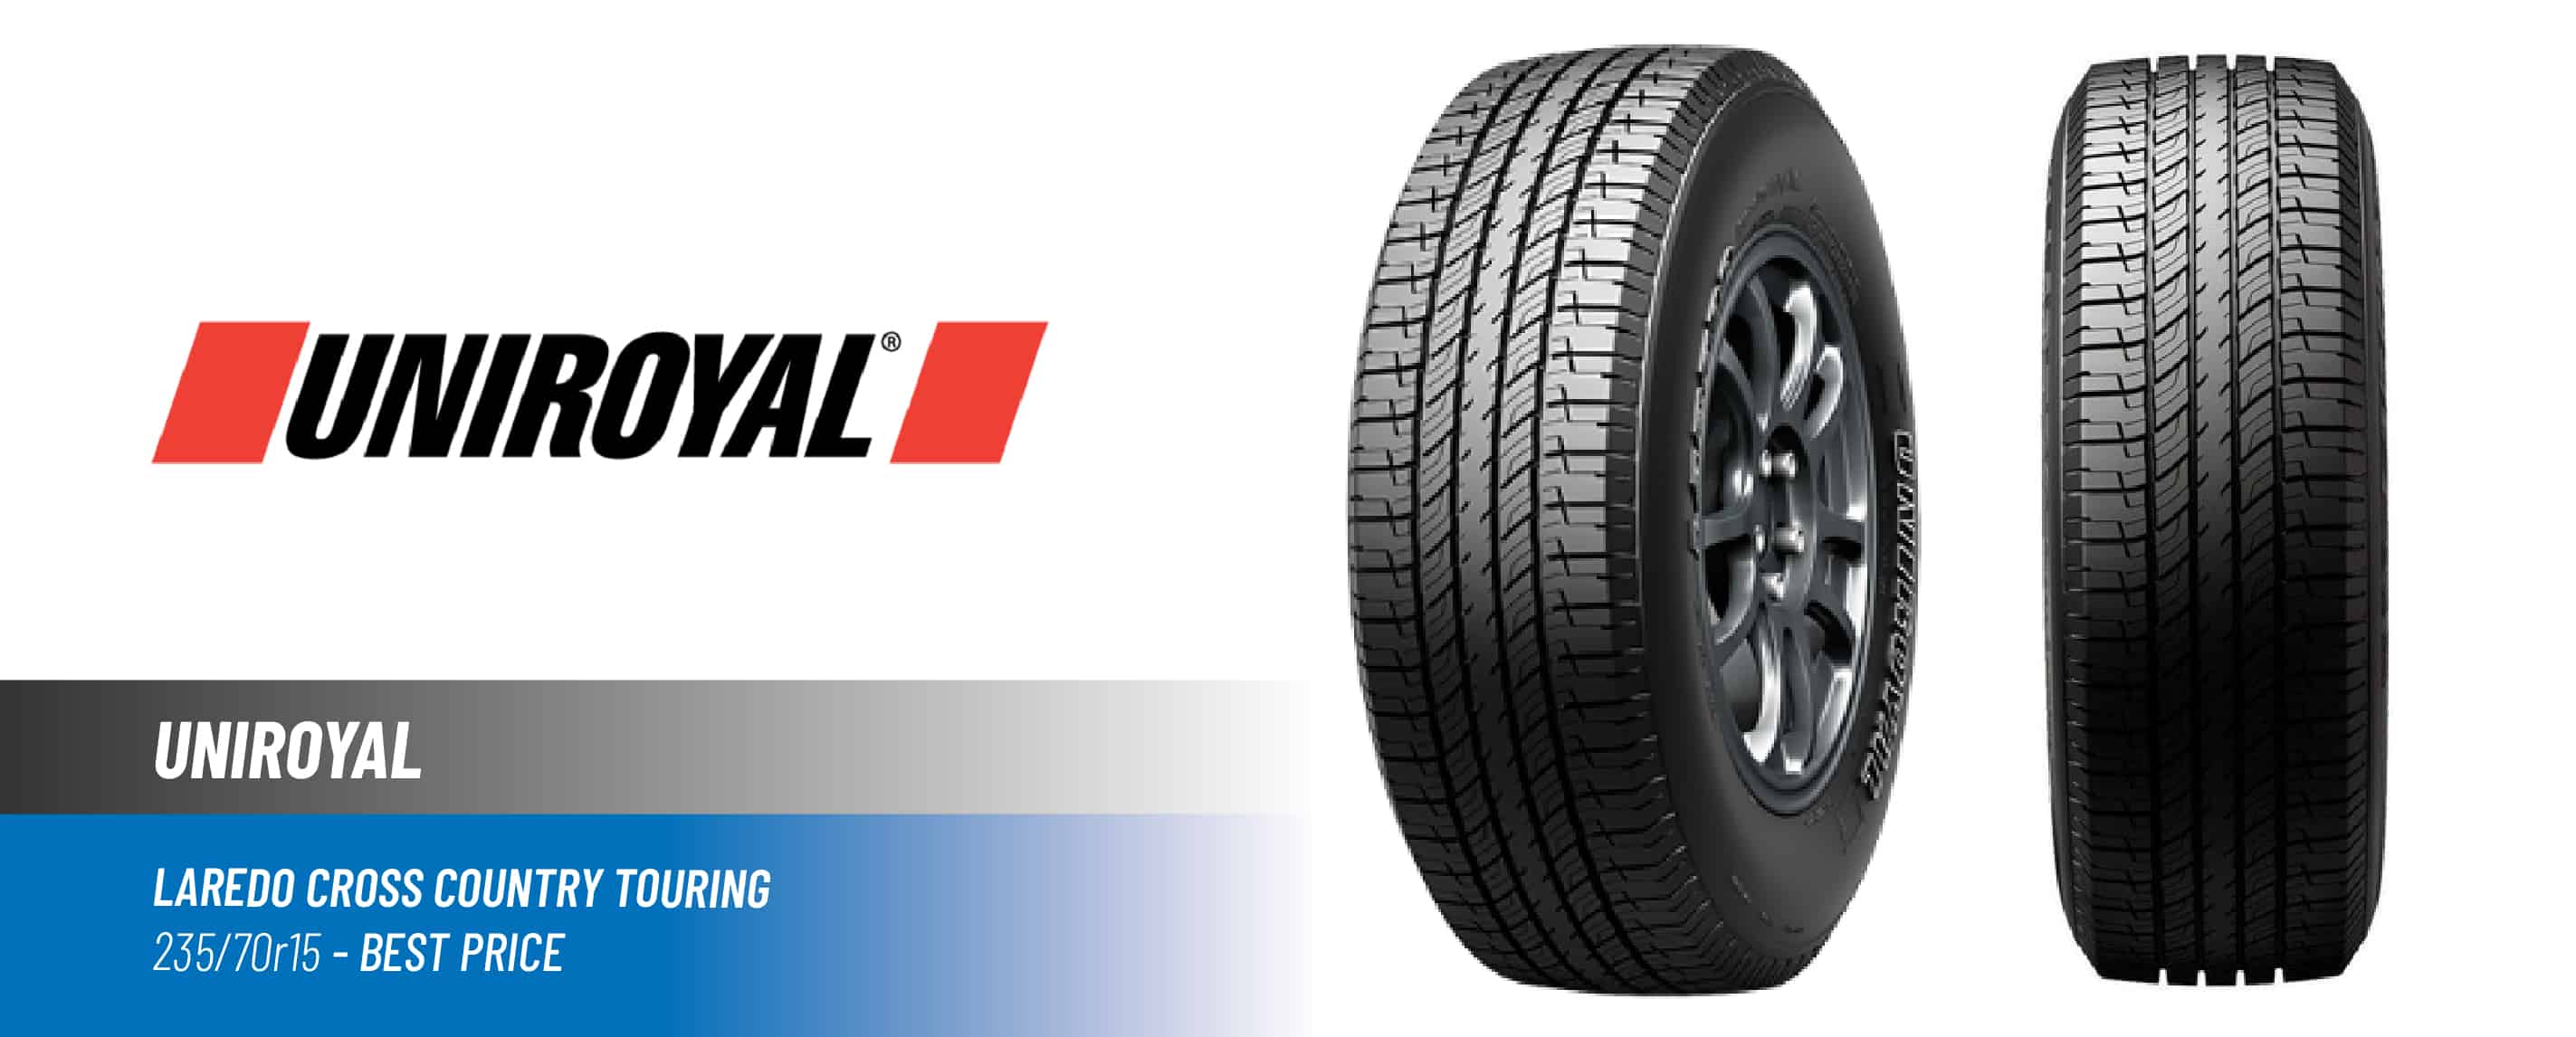 Top#4 Best Price: Uniroyal Laredo Cross Country Touring -best 225/70 r16